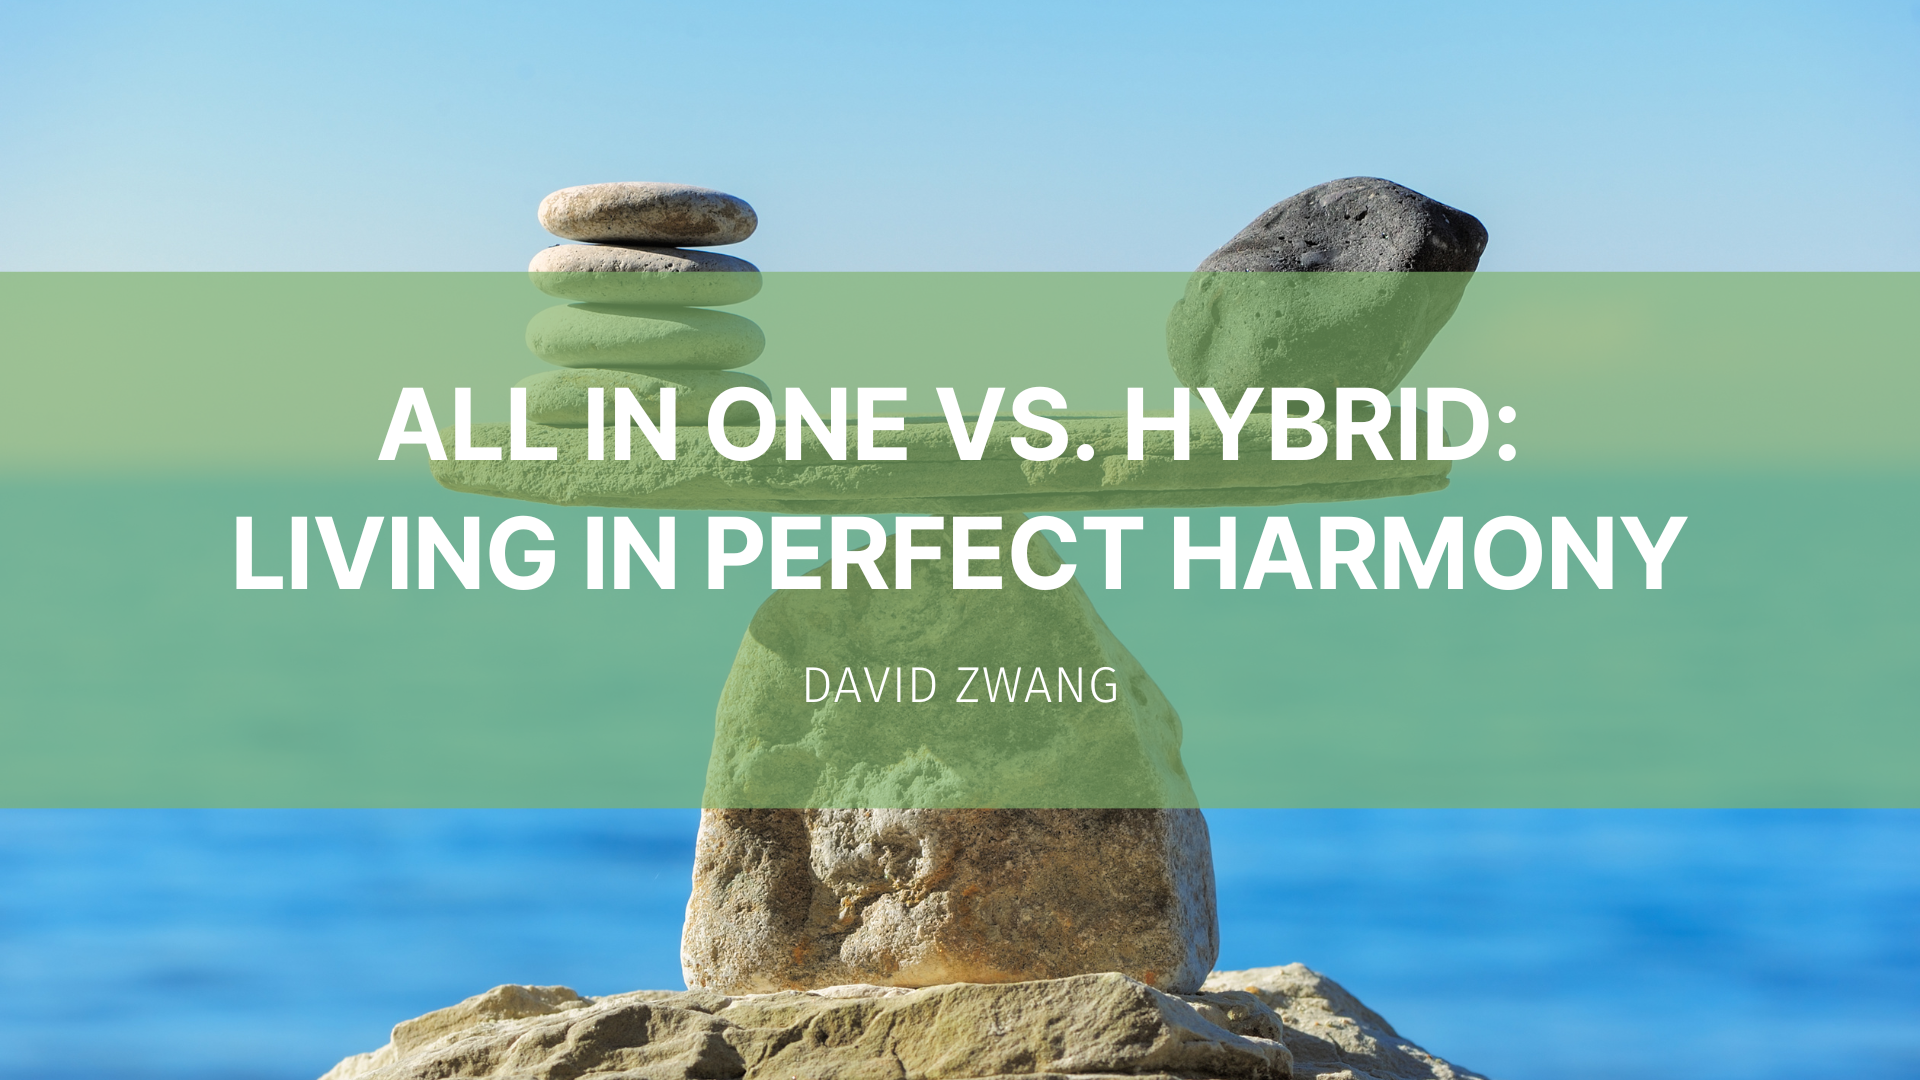 Featured image for “All in One vs. Hybrid: Living in Perfect Harmony”